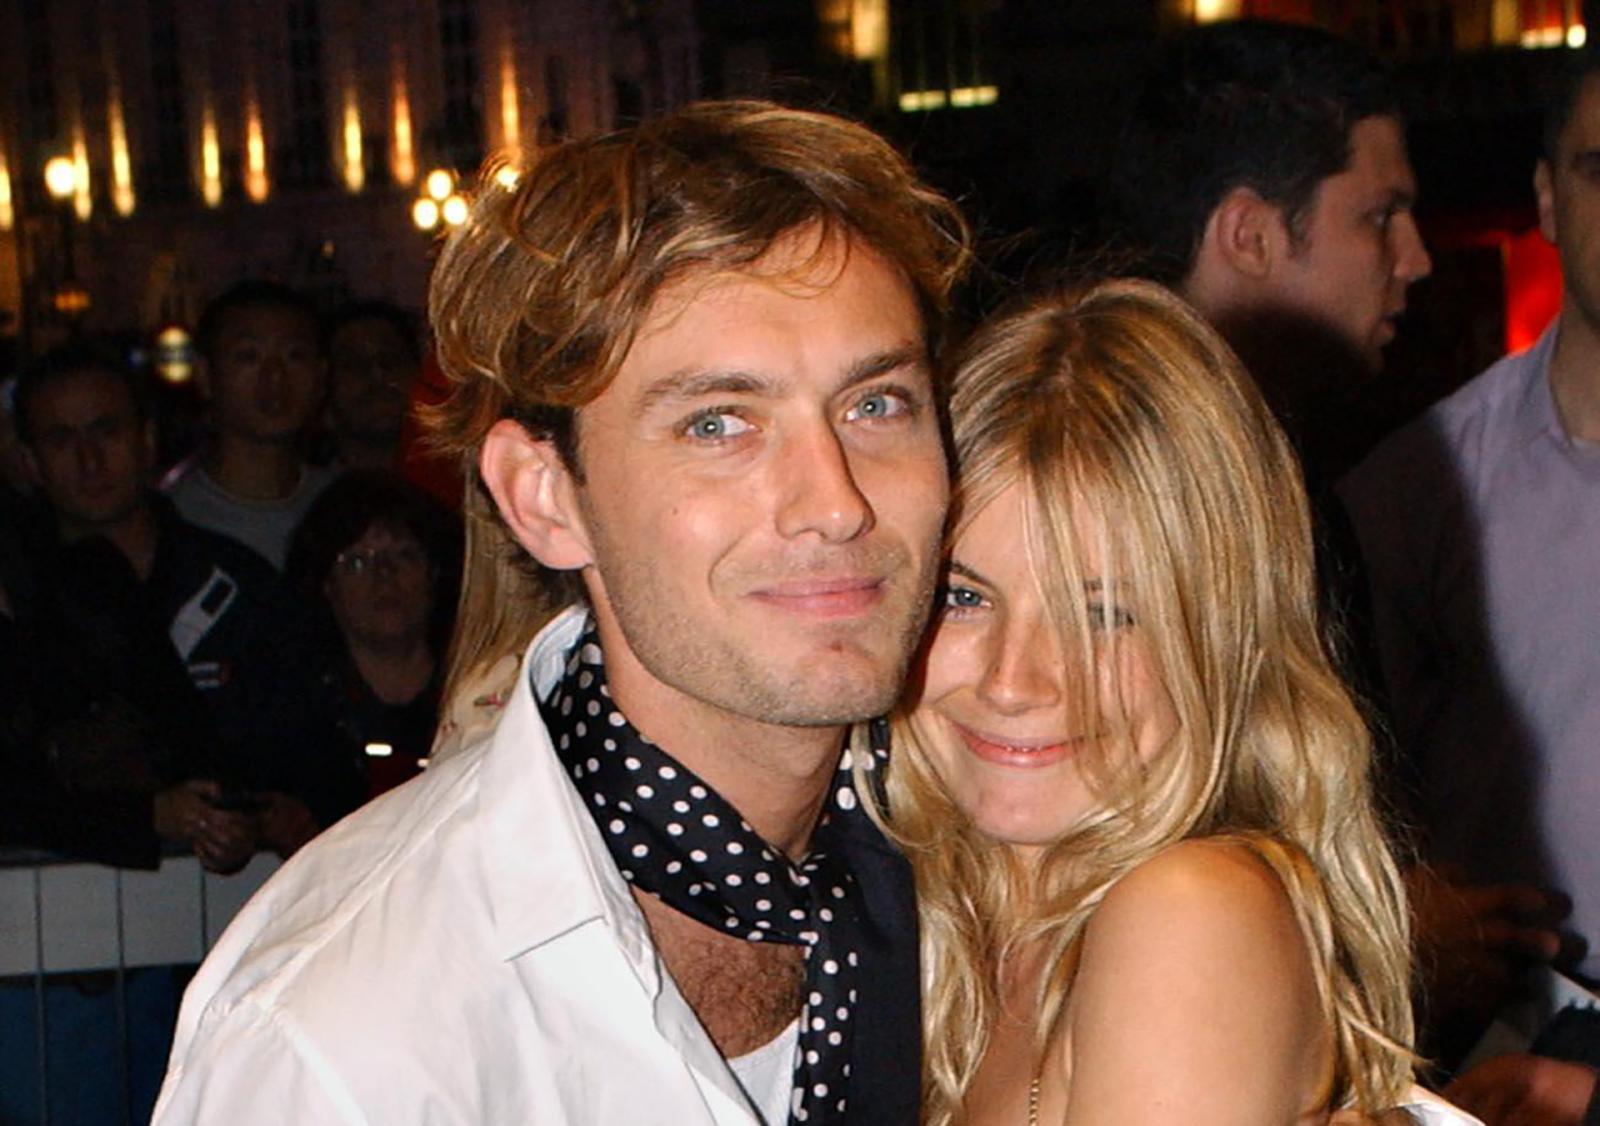 Last Minute Breakup: Celebrity Couples Who Couldn't Make It to the Altar - image 5